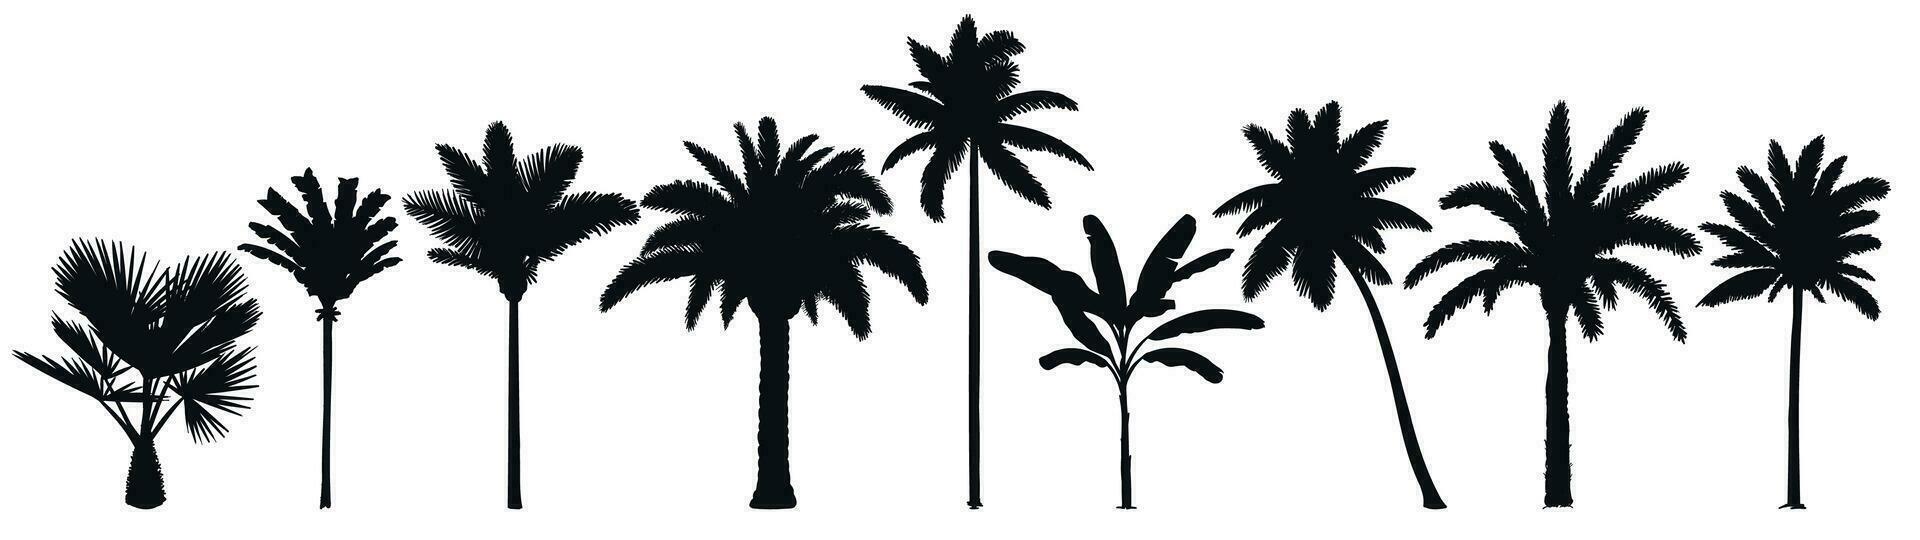 Palm trees silhouette. Retro coconut trees, hand drawn tropical palm silhouettes vector set